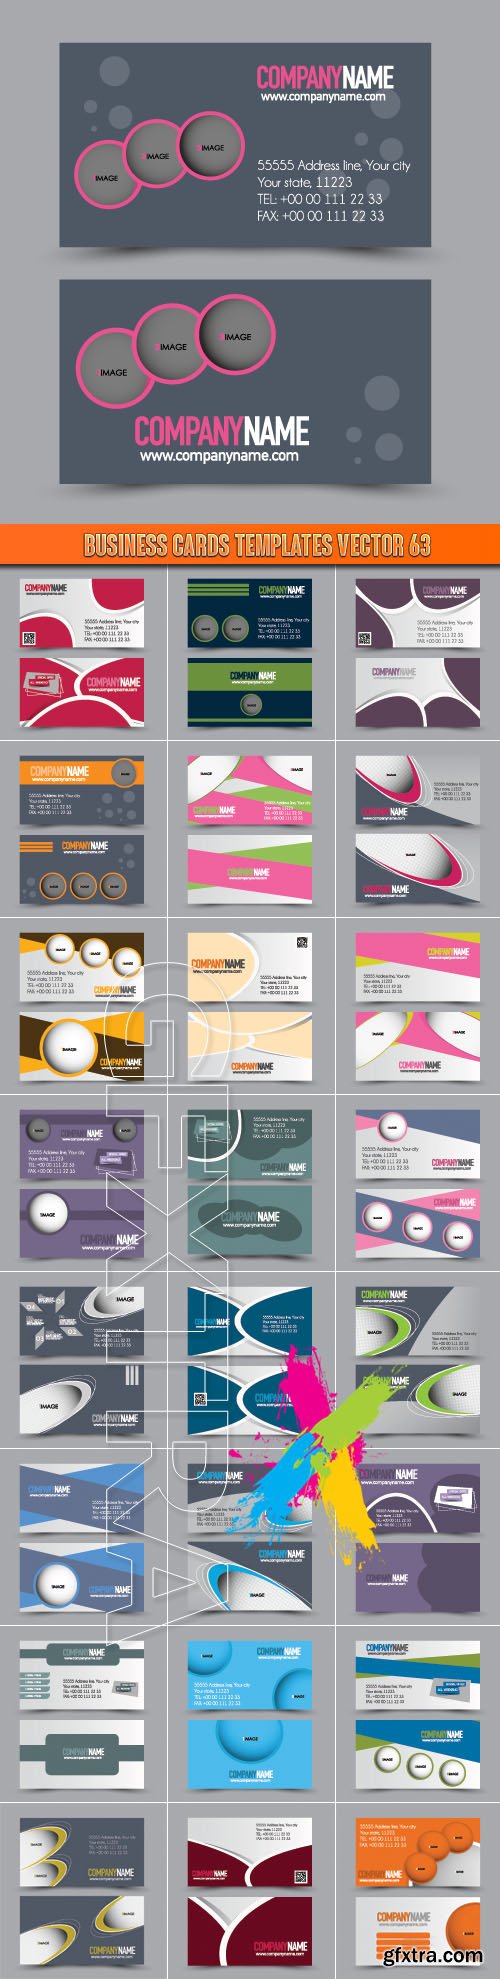 Business Cards Templates vector 63